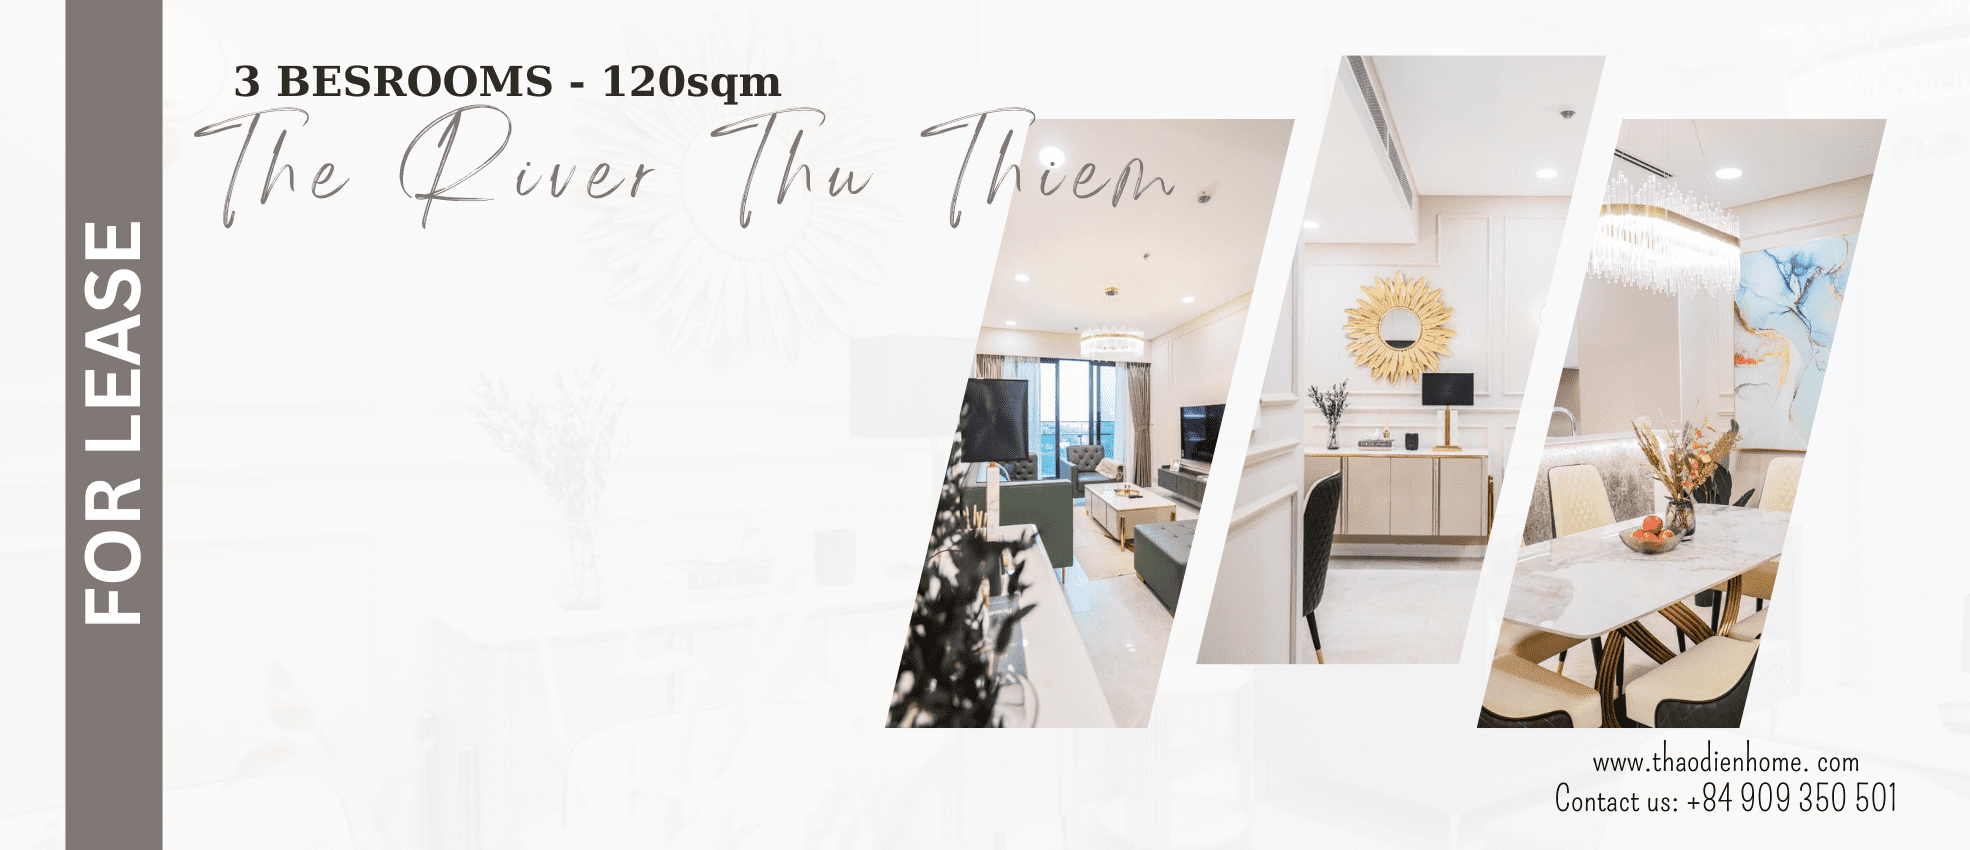 Cosy and sophisticated 3-bedroom apartment at The River Thu Thiem